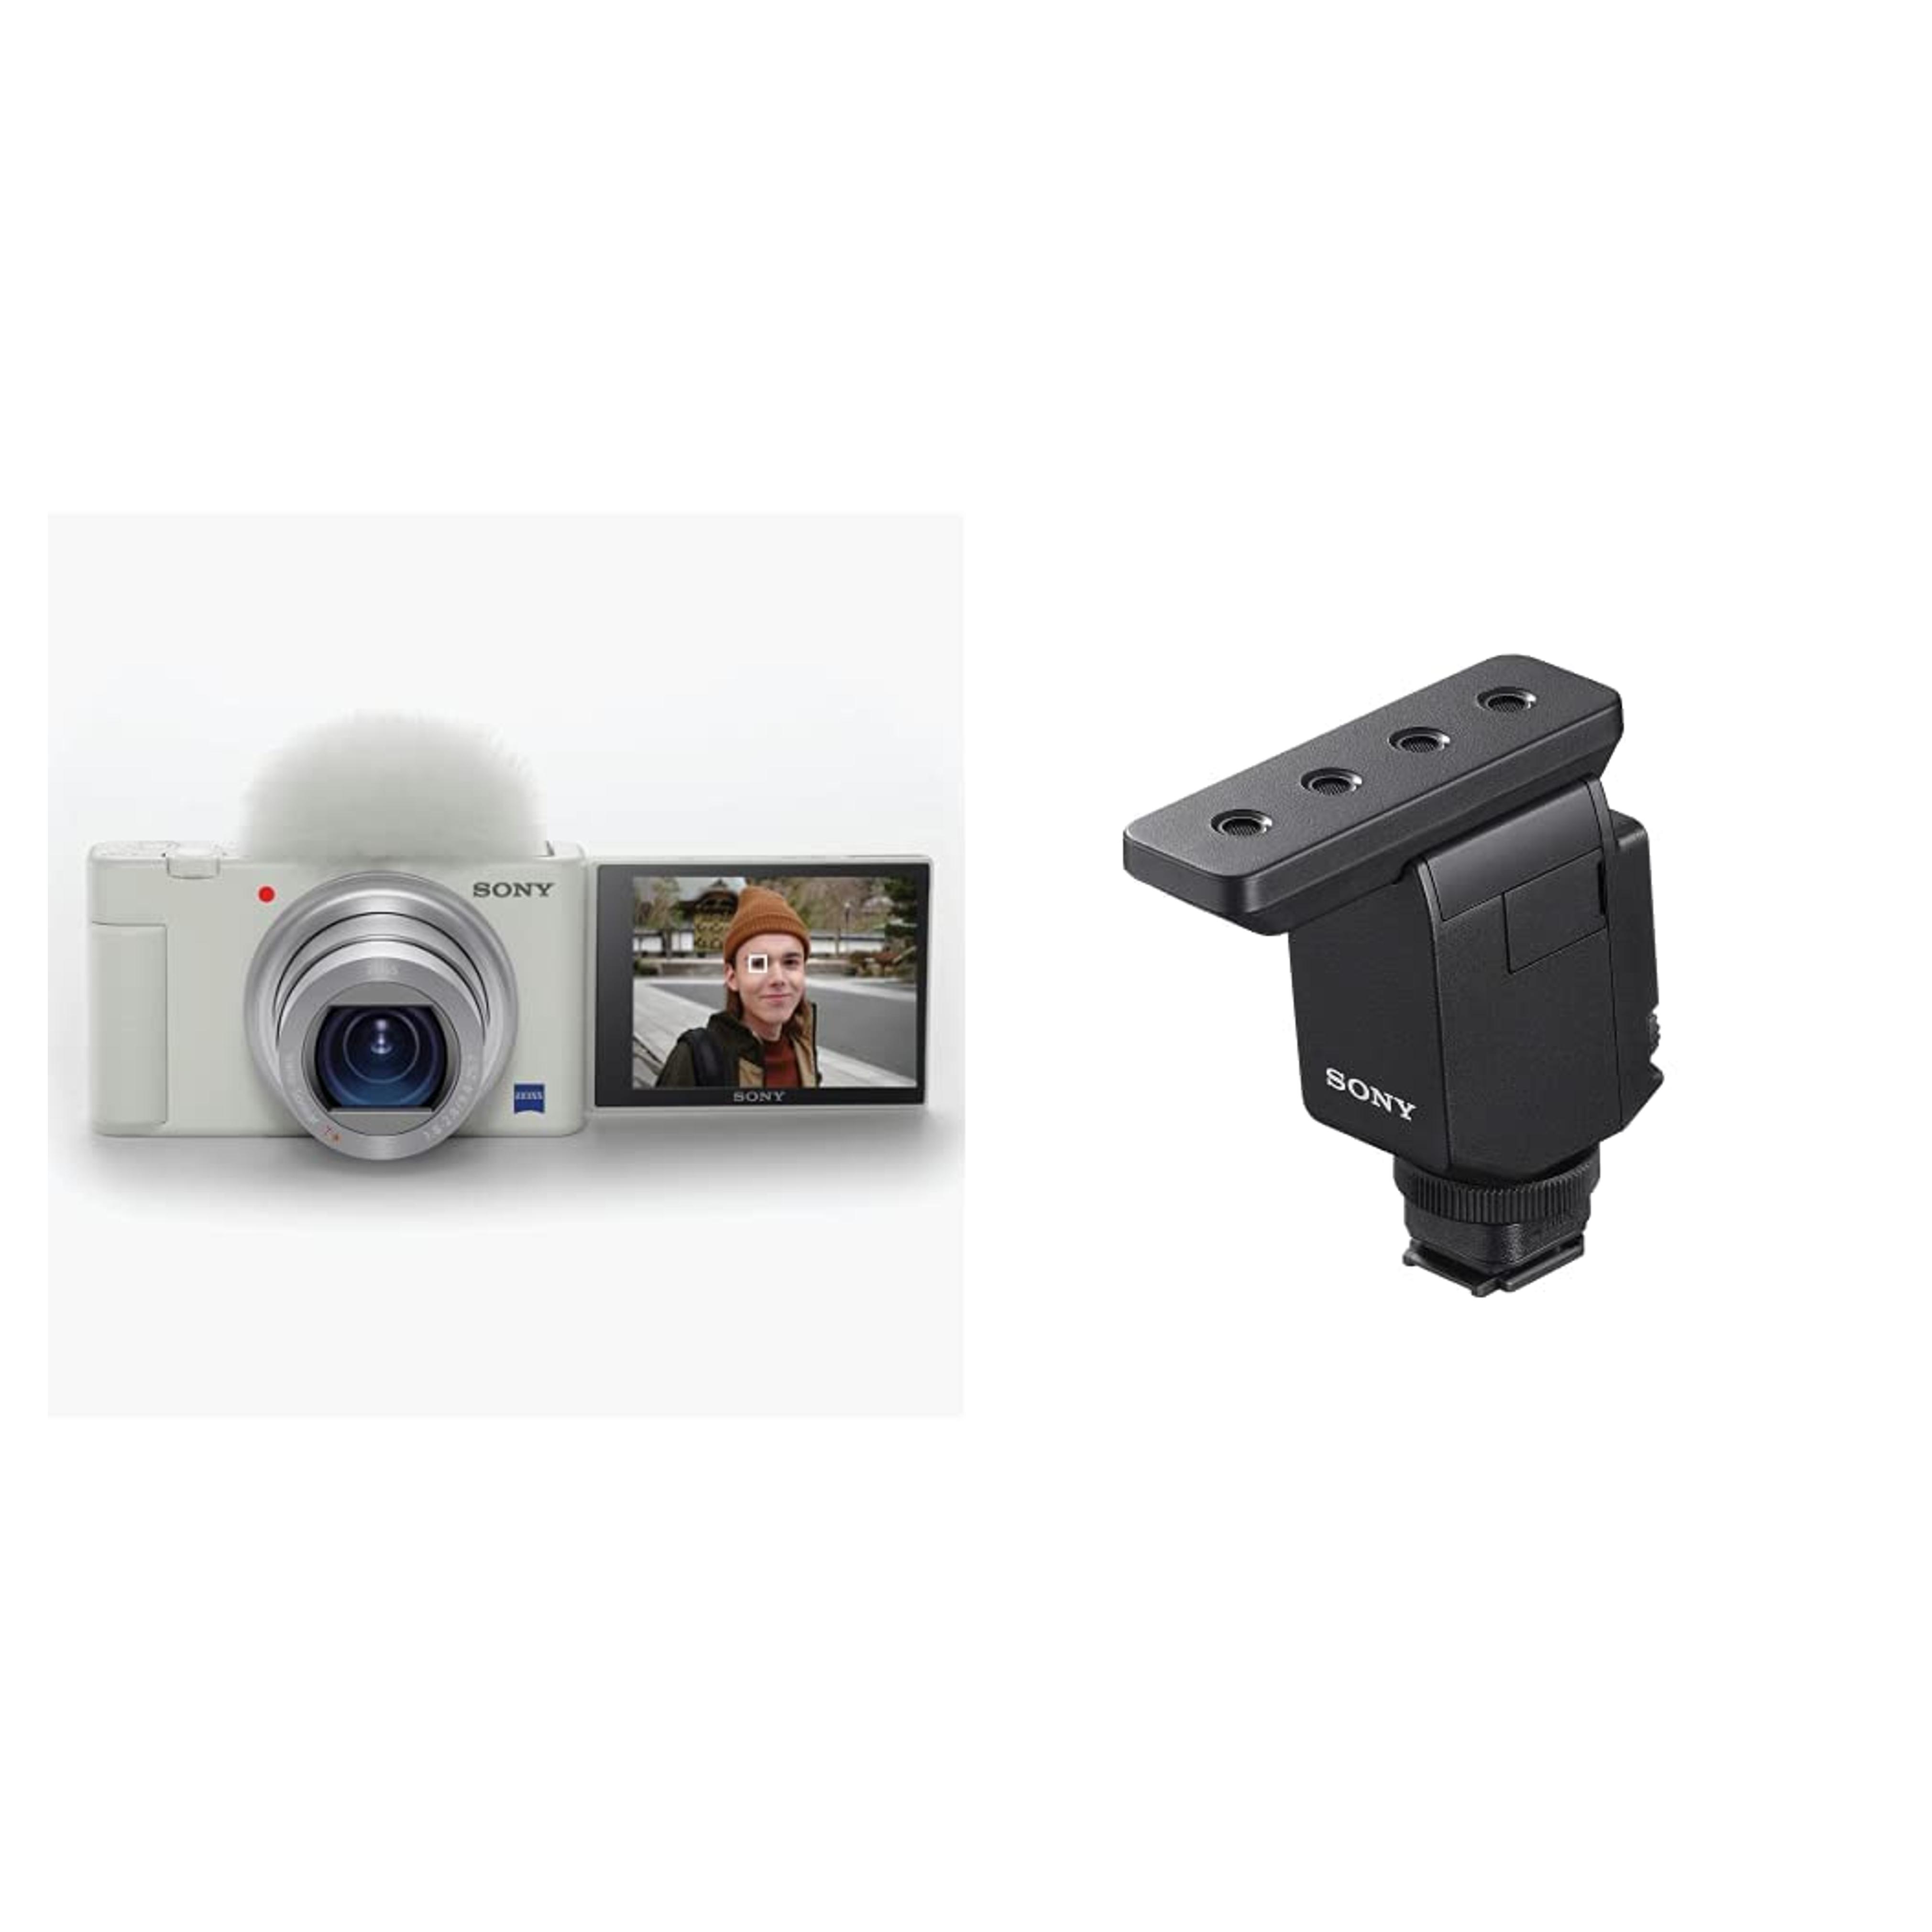 Sony ZV-1 Digital Camera for Content Creators, Vlogging and YouTube with Flip Screen, Live Video Streaming, Compact Digital MI Microphone with Beamforming Technology for three switchable directivities